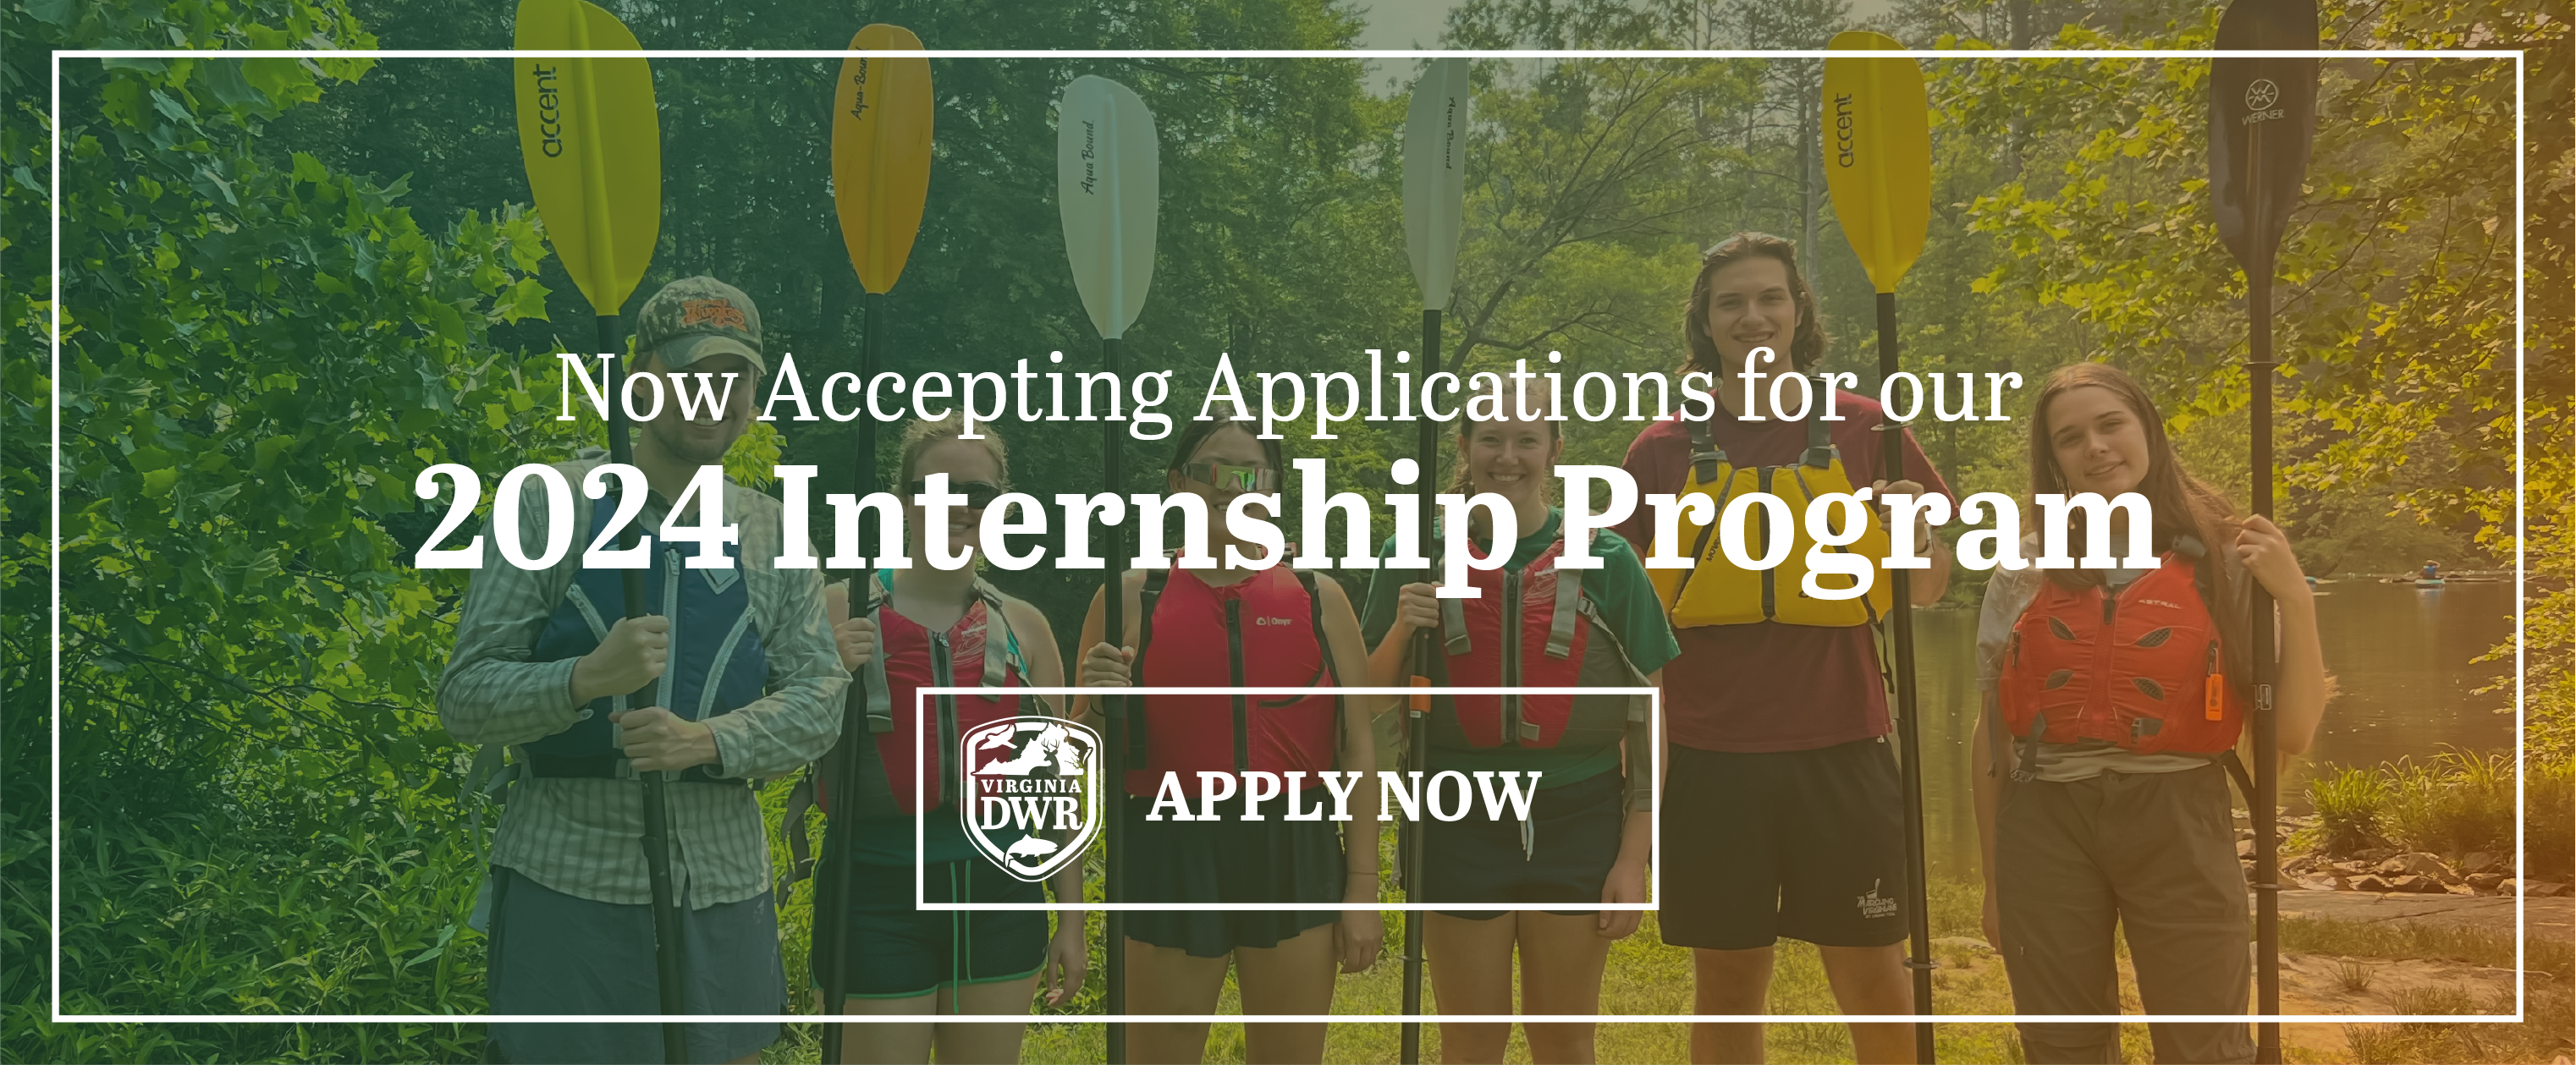 Now accepting applications for our 2024 Internship Program!